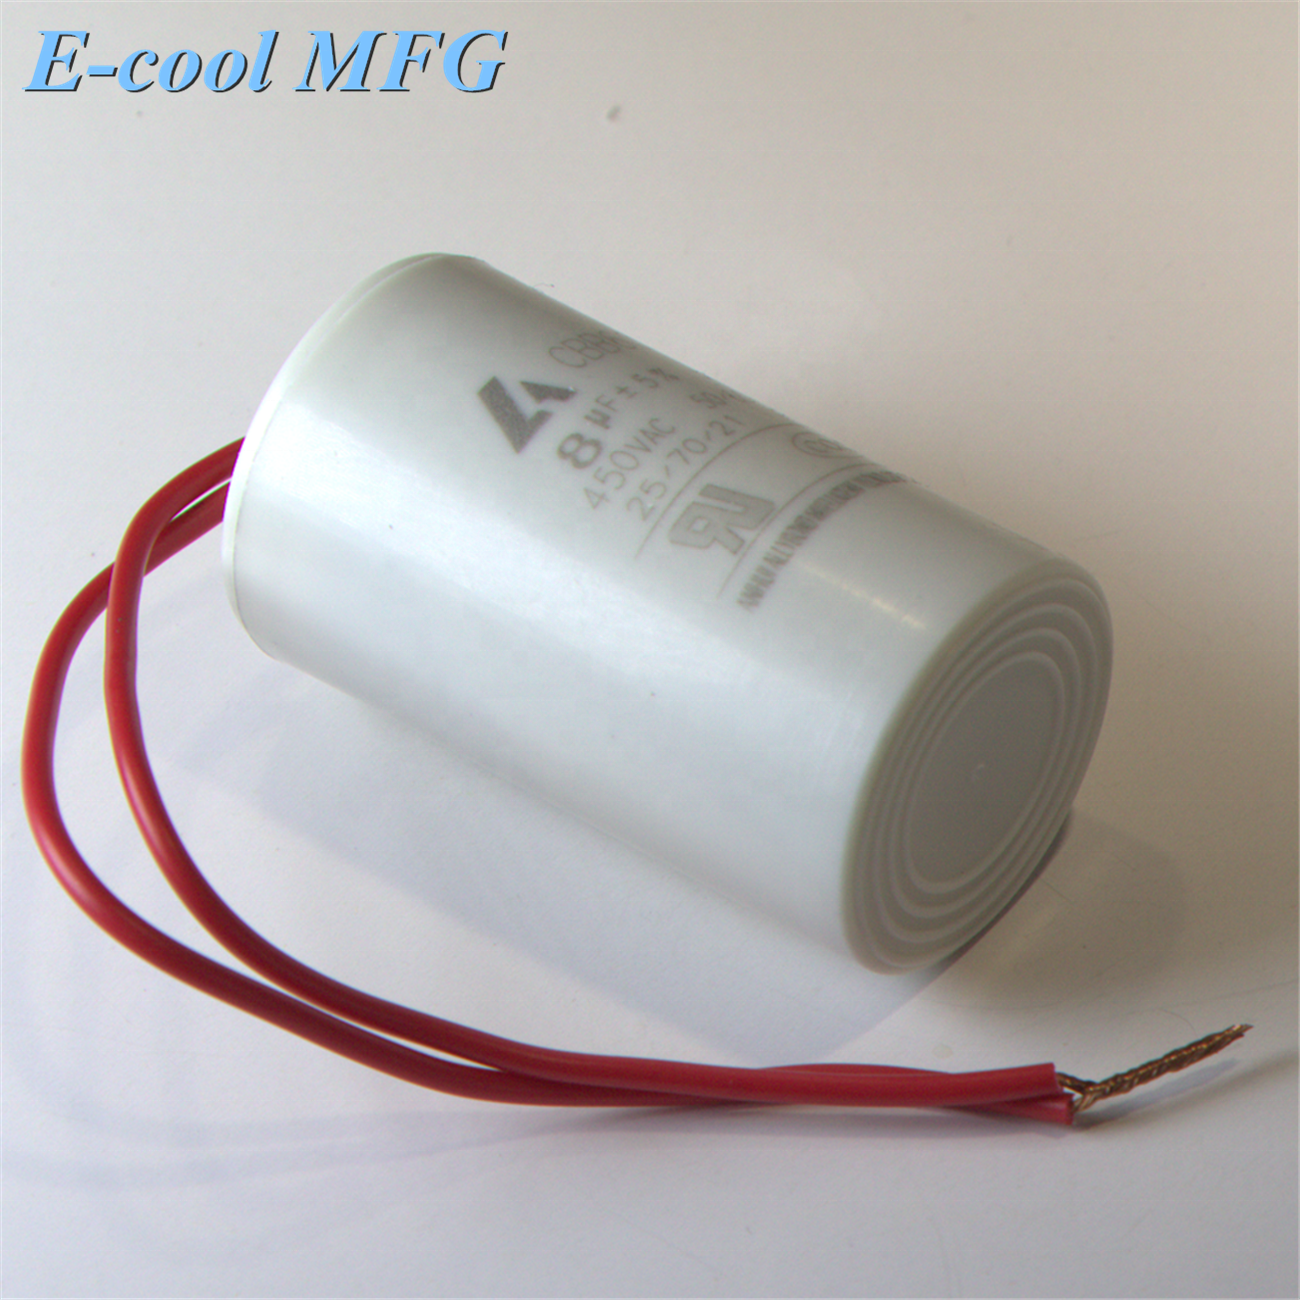 2-100uf CBB60 motor capacitor 450VAC with lead wire